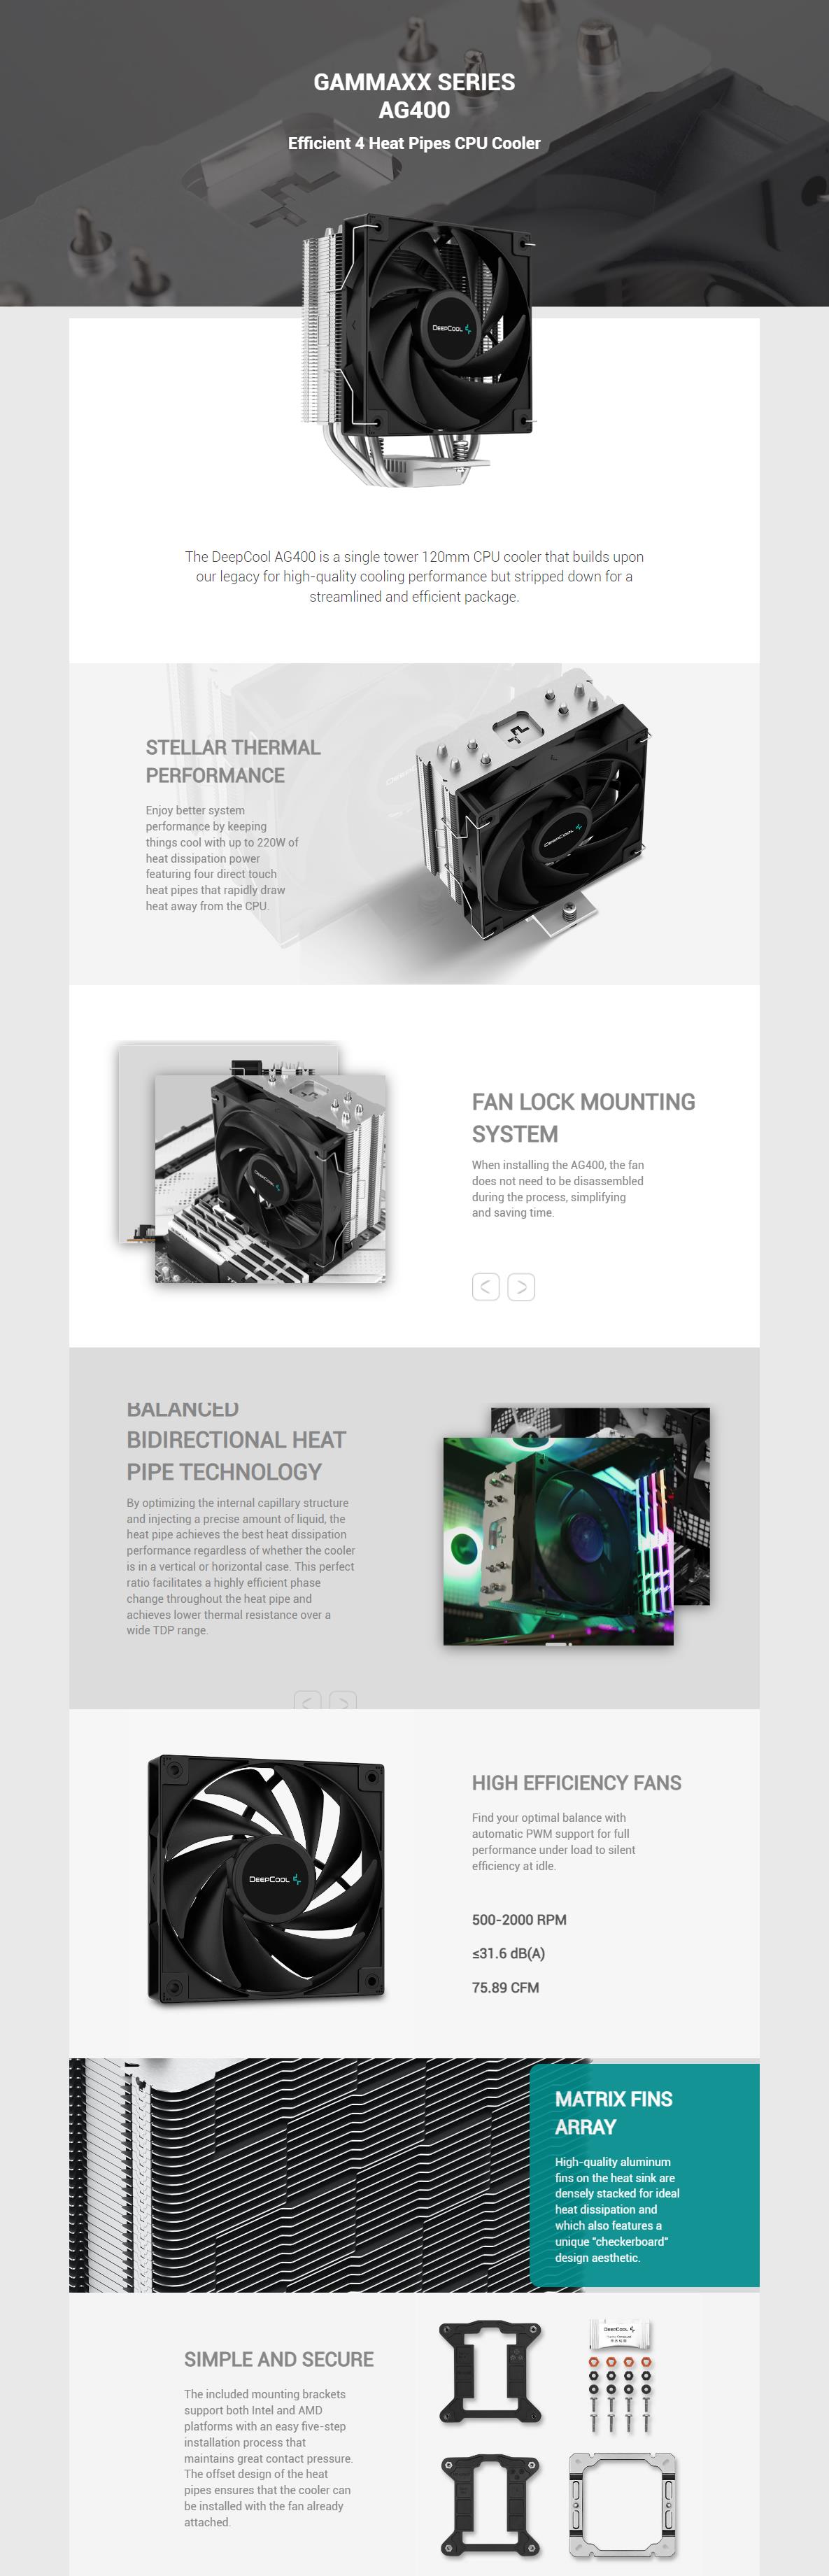 A large marketing image providing additional information about the product DeepCool AG400 CPU Cooler - Additional alt info not provided